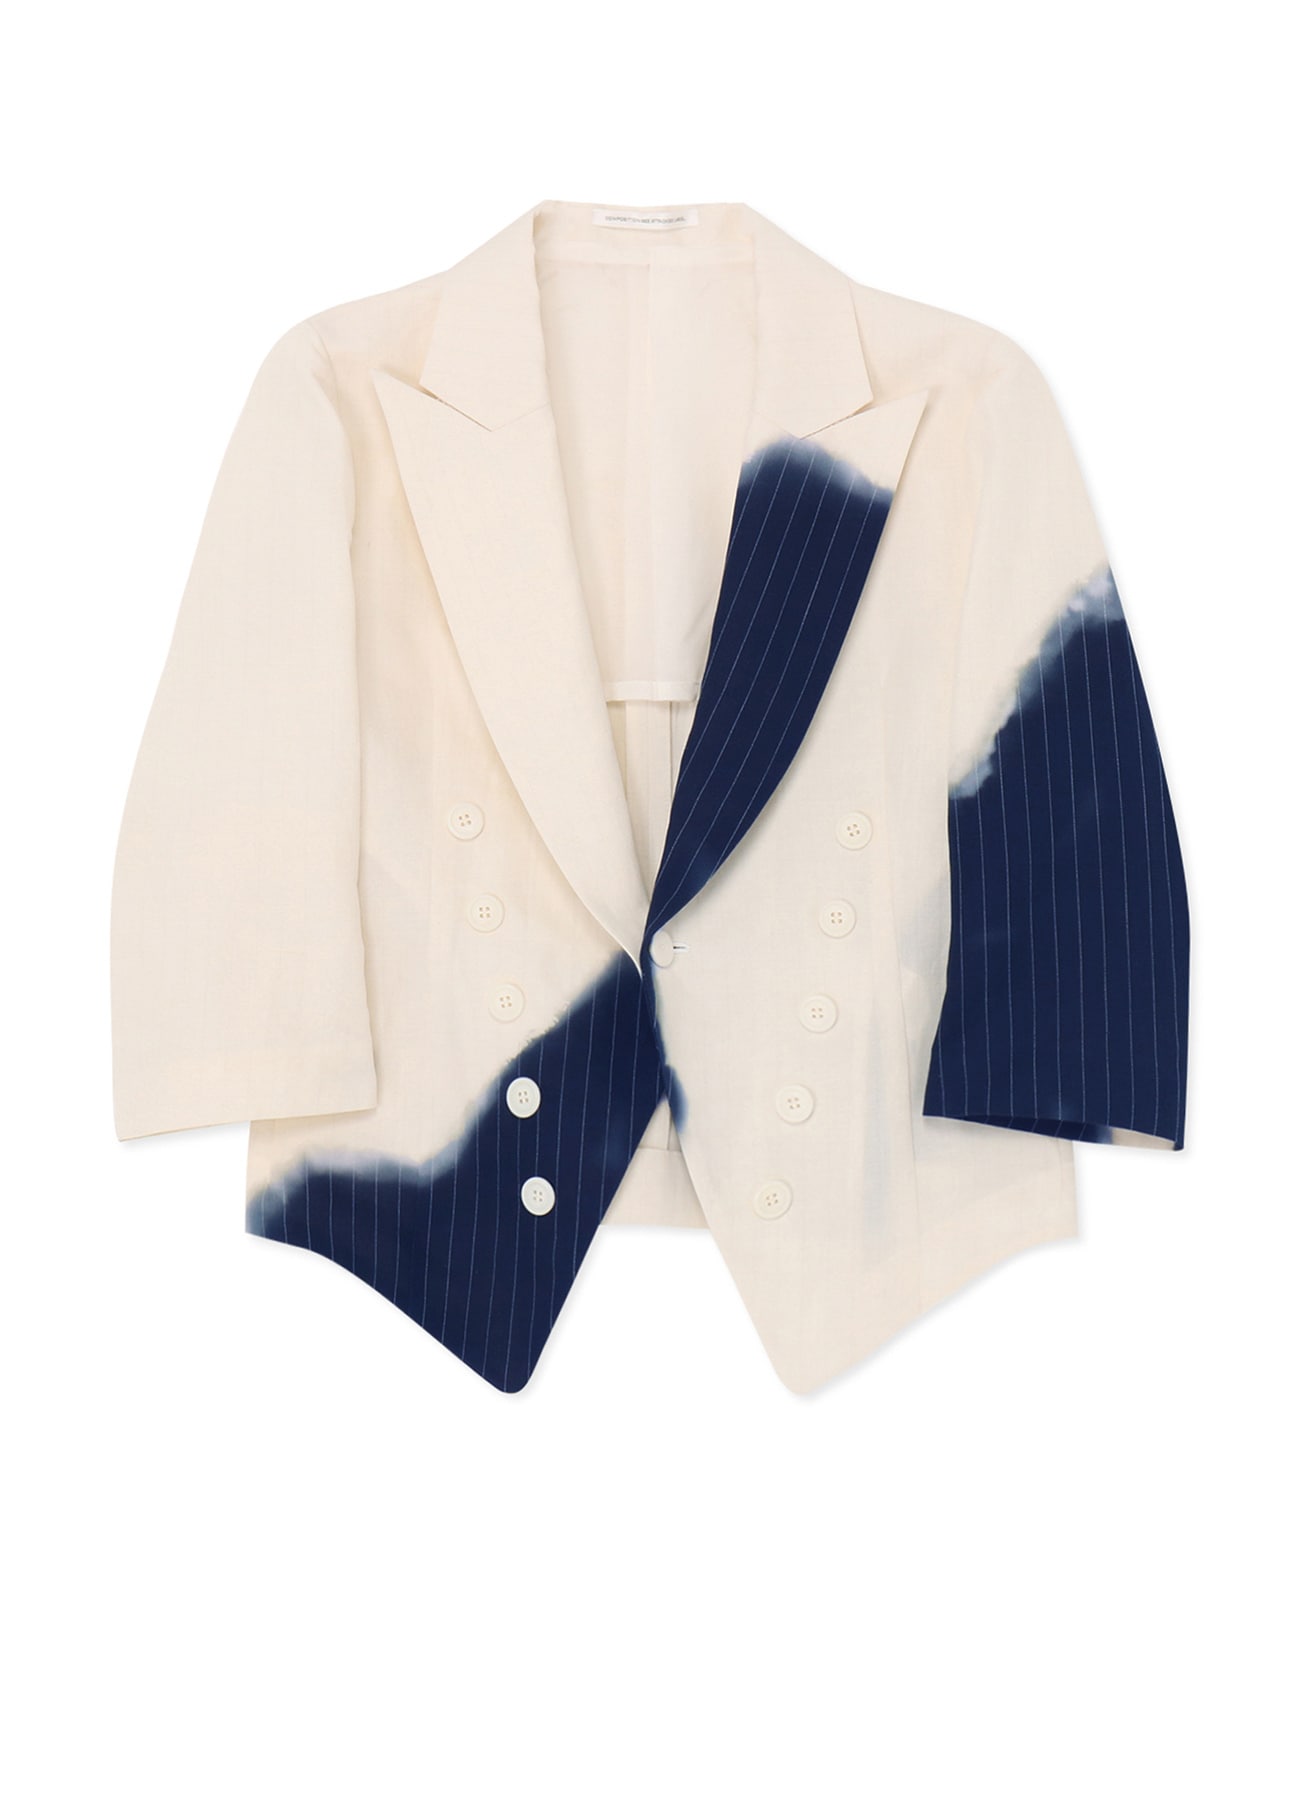 LINEN/COTTON SWALLOWTAIL JACKET WITH PARTIAL PINSTRIPE PATTERN